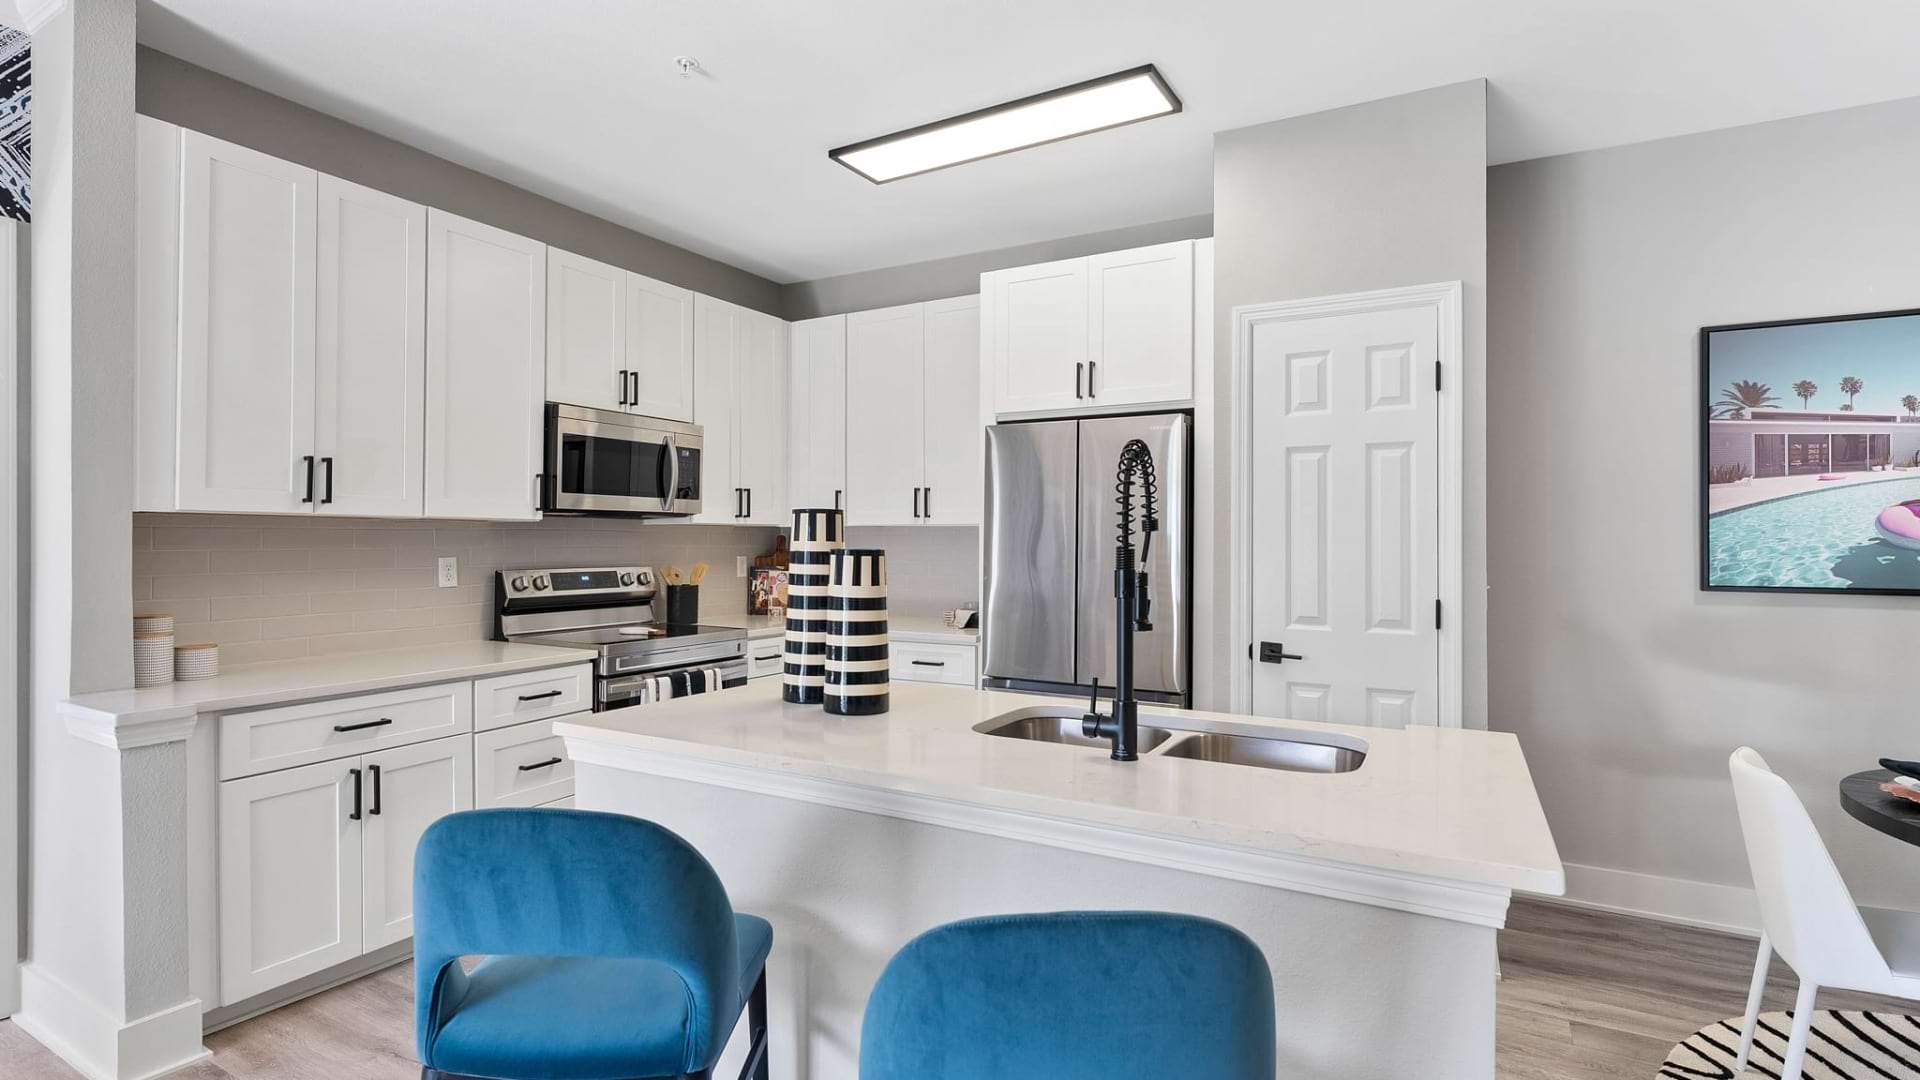 Kitchen with Island Seating at Our Brier Creek Apartments in NC